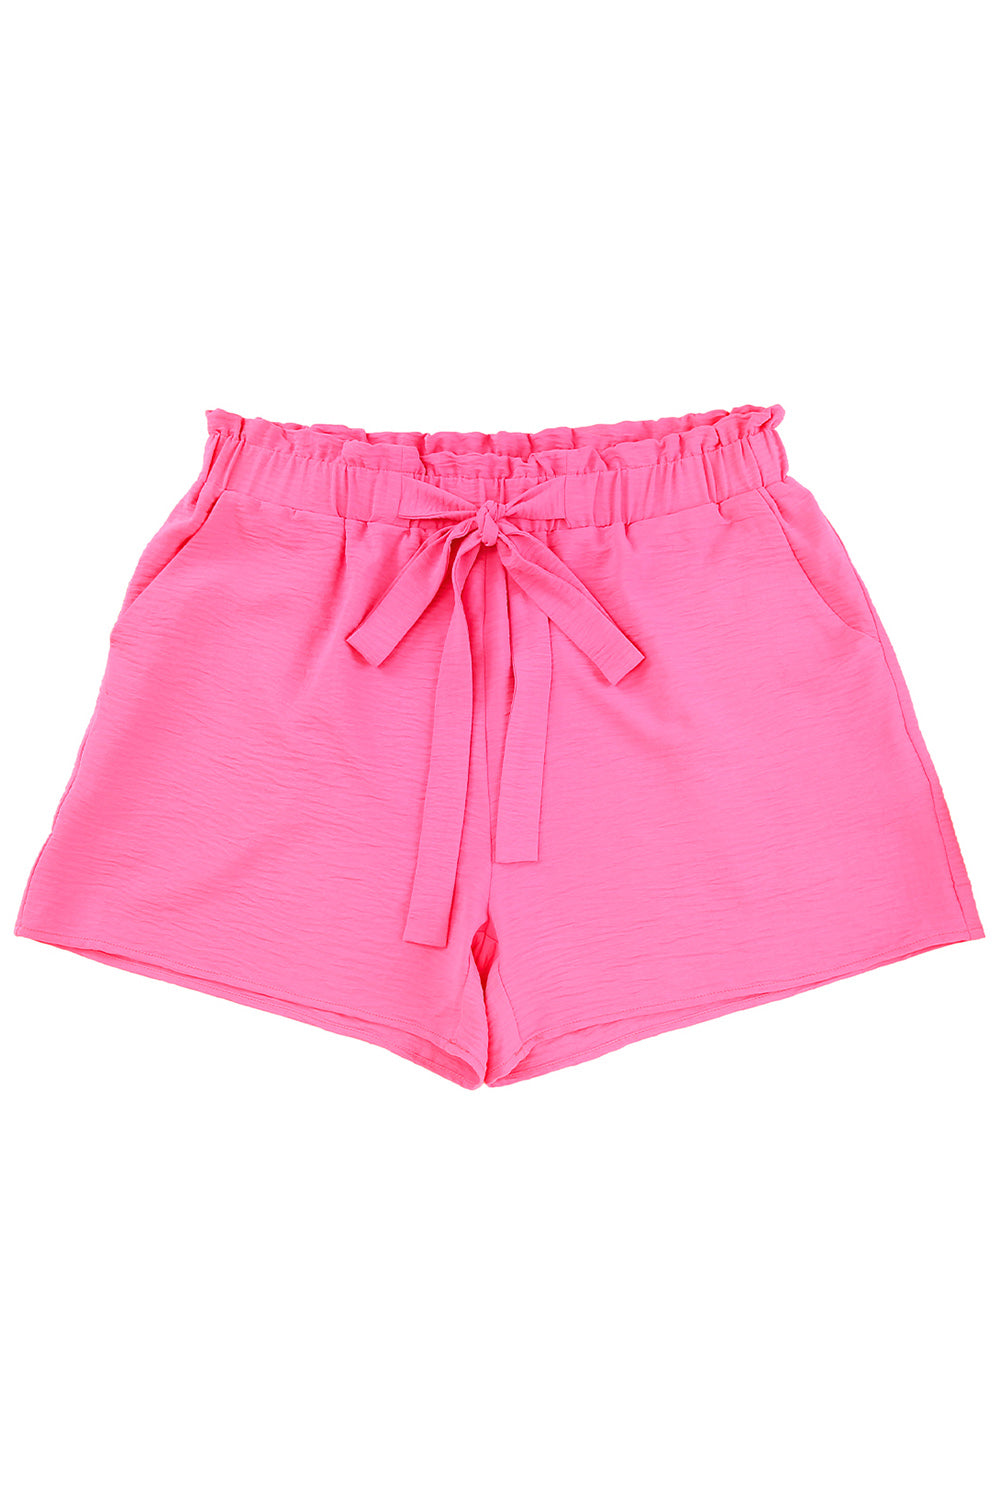 Rose Casual Paperbag High Waist Textured Plus Size Shorts